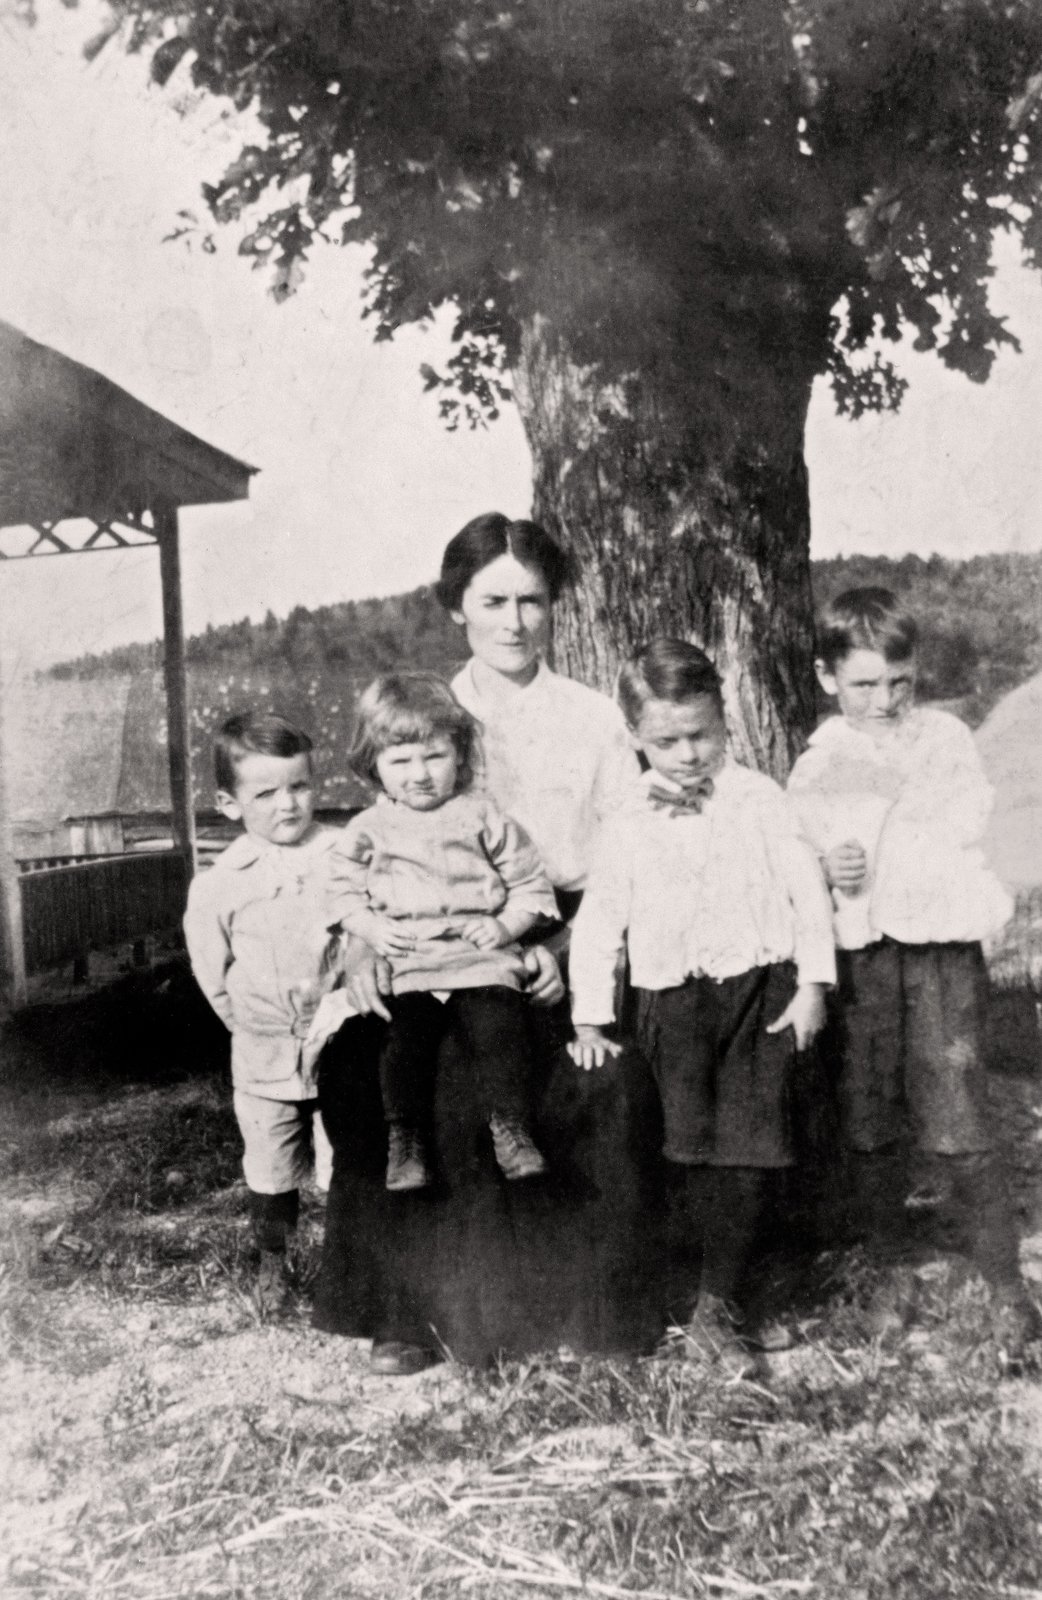 Bryan’s paternal grandmother Ella Kelly Daly, with children